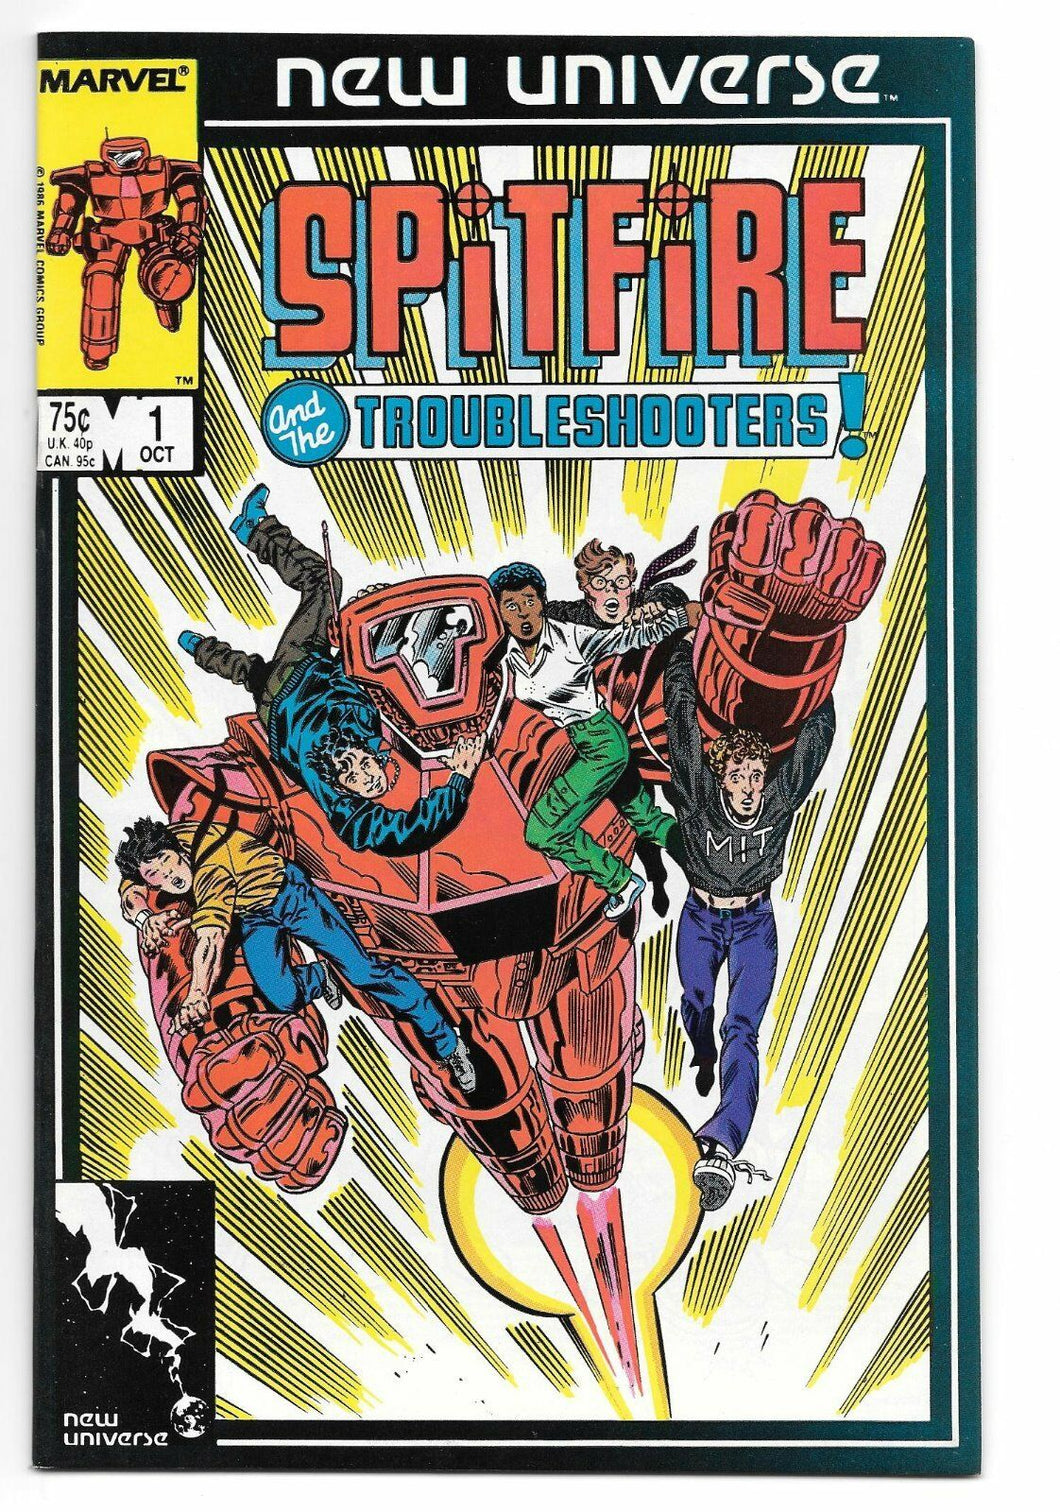 SPITFIRE AND THE TROUBLESHOOTERS #1-13 (Marvel 1986) COMPLETE SET